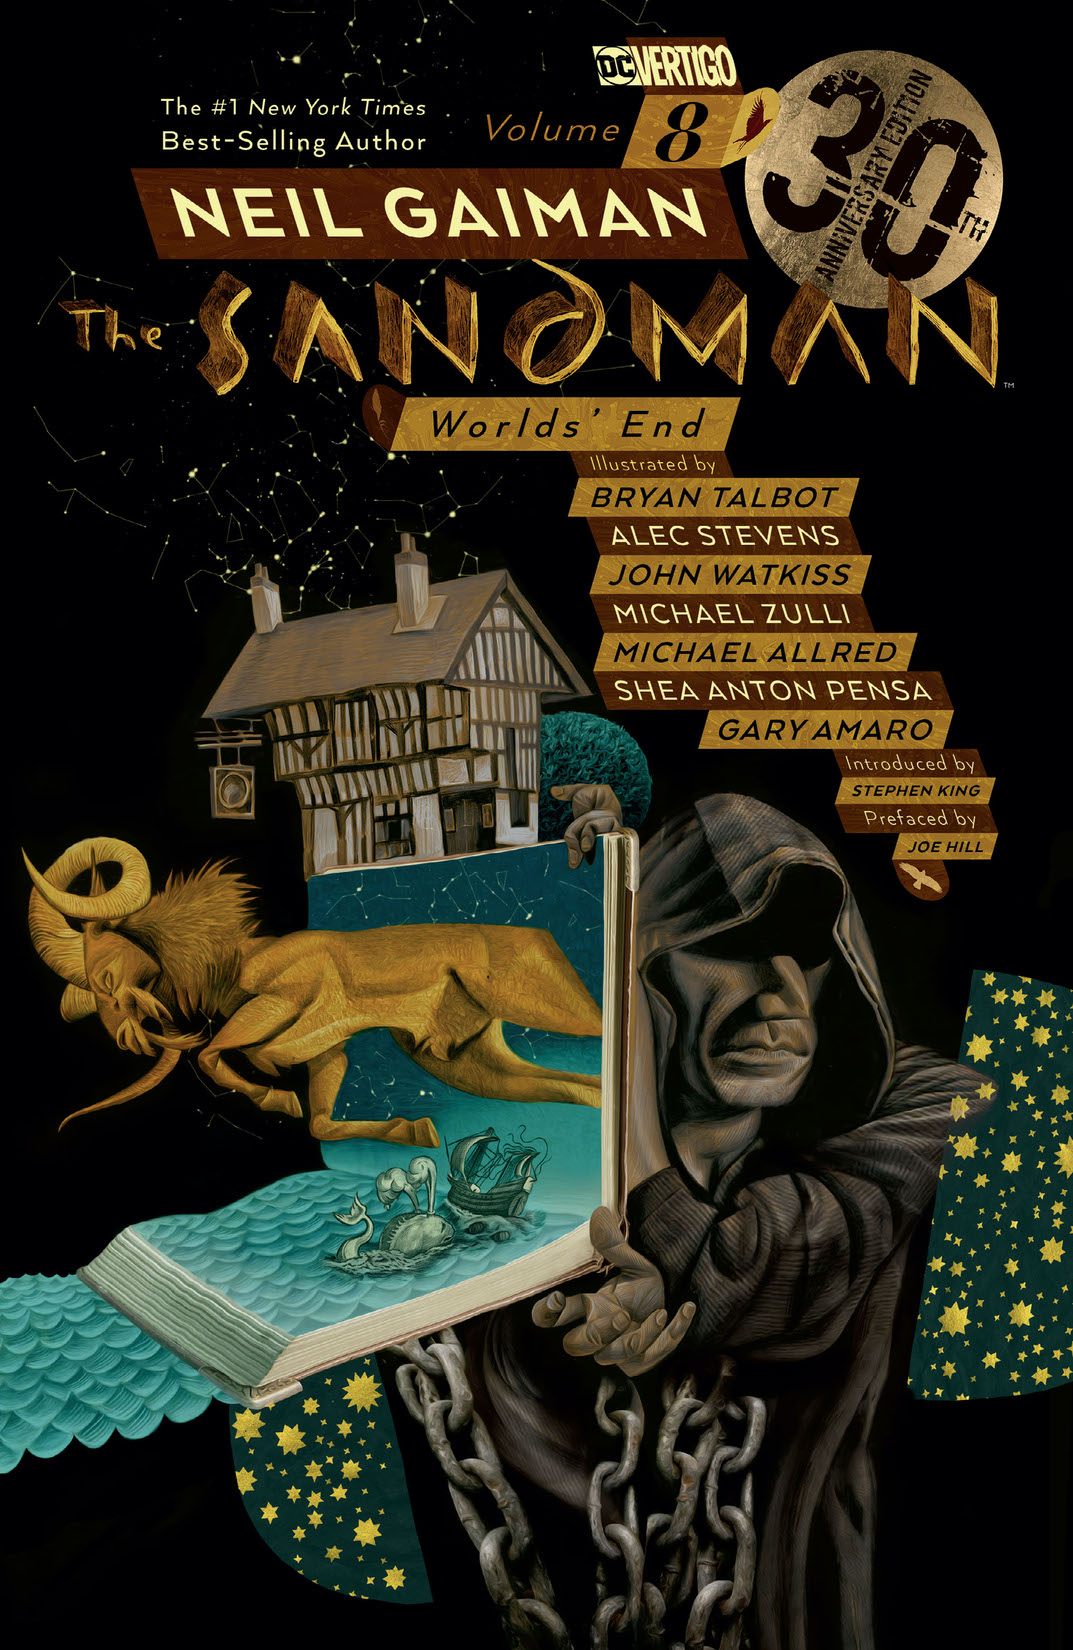 Sandman Vol. 8: World's End 30th Anniversary New Edition preview images